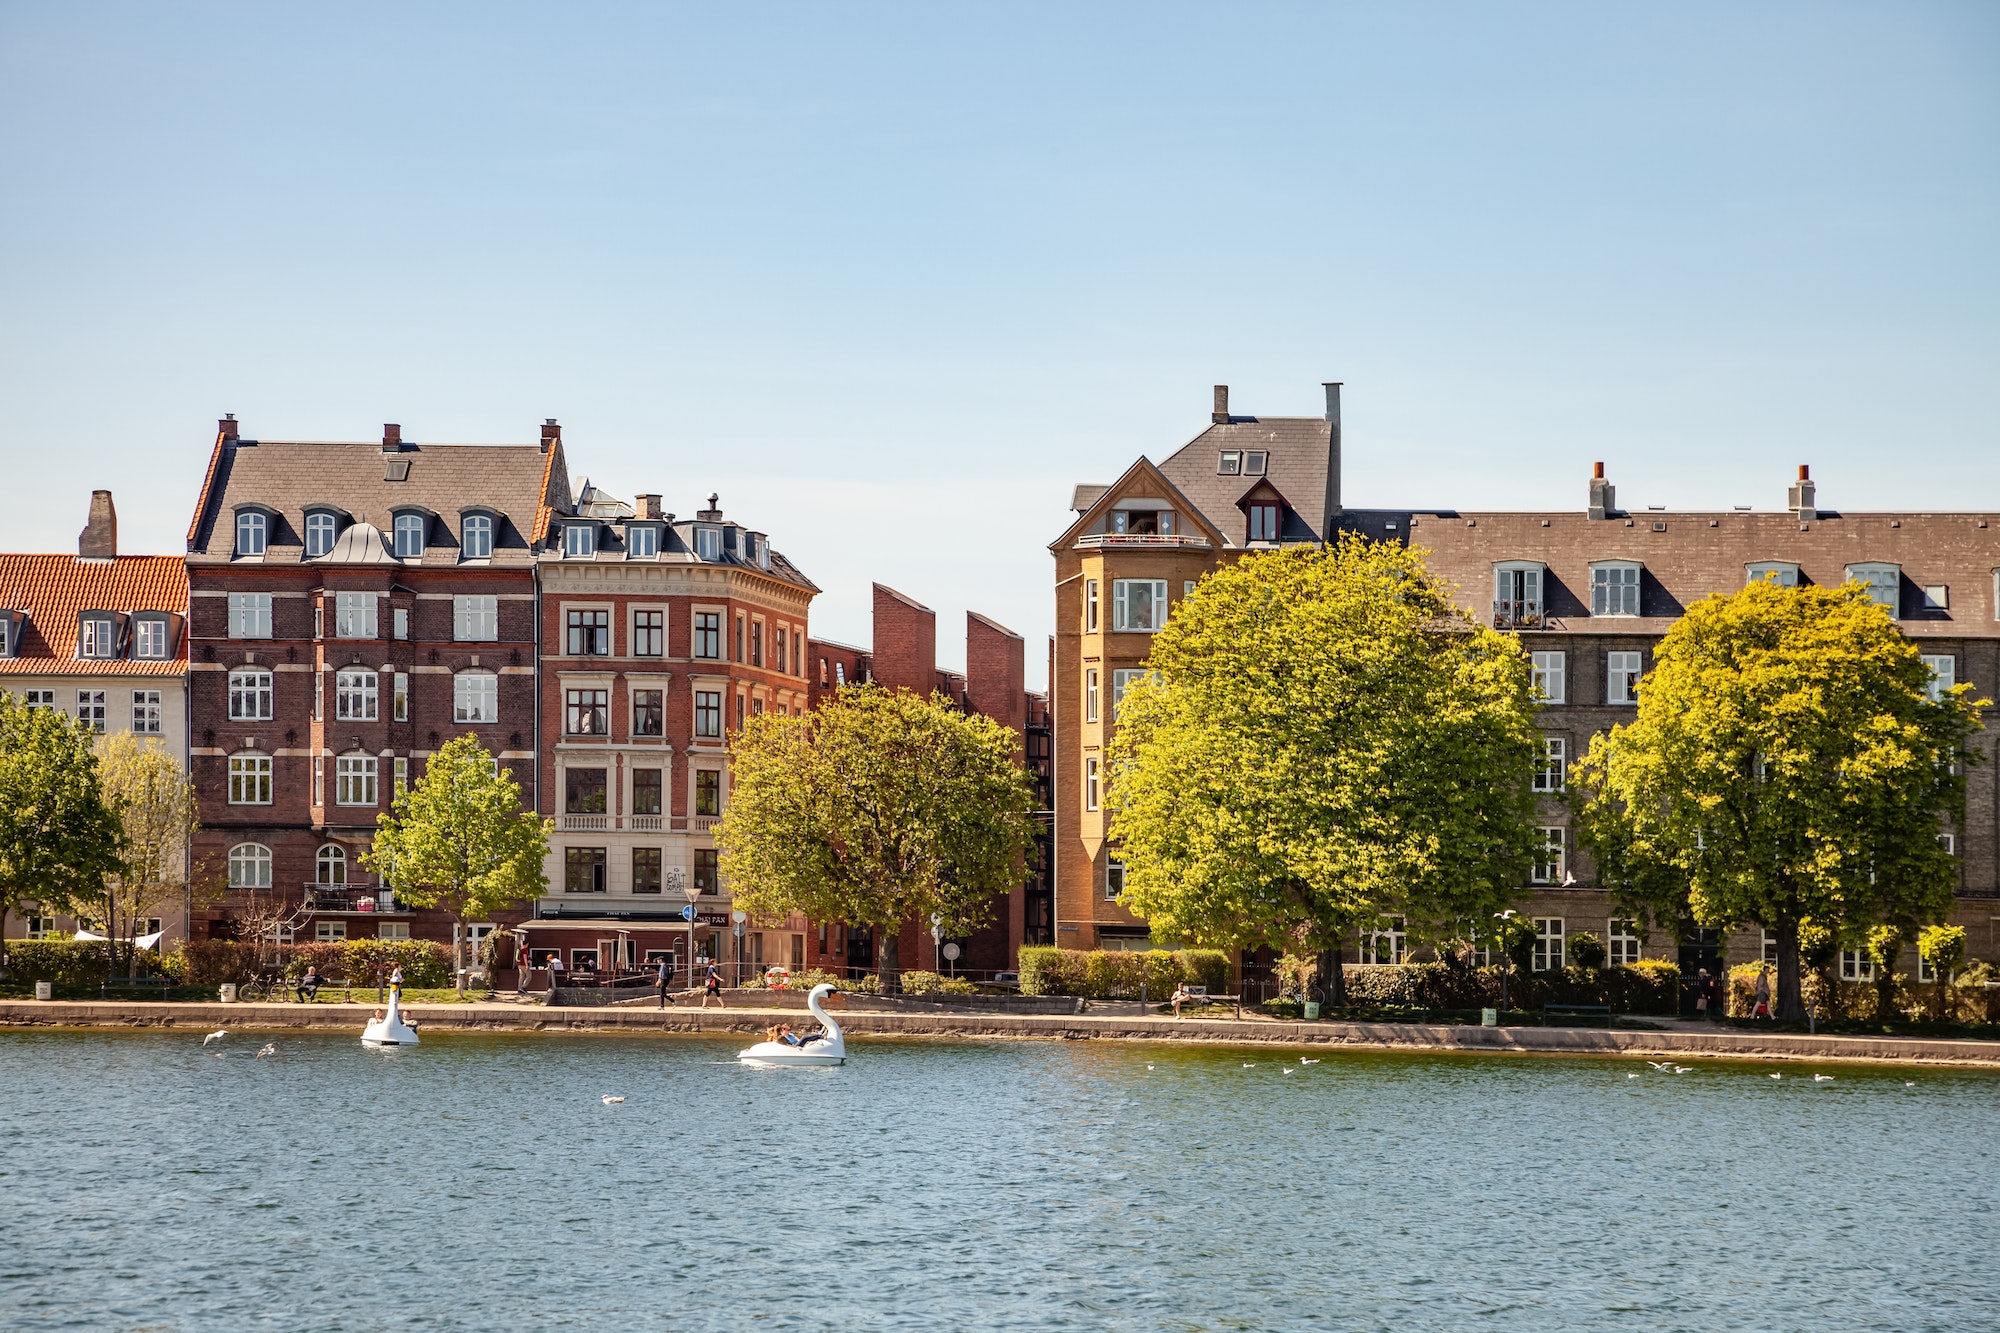 COPENHAGEN, DENMARK - MAY 6, 2018: catamarans shaped of swans on river in front of buildings